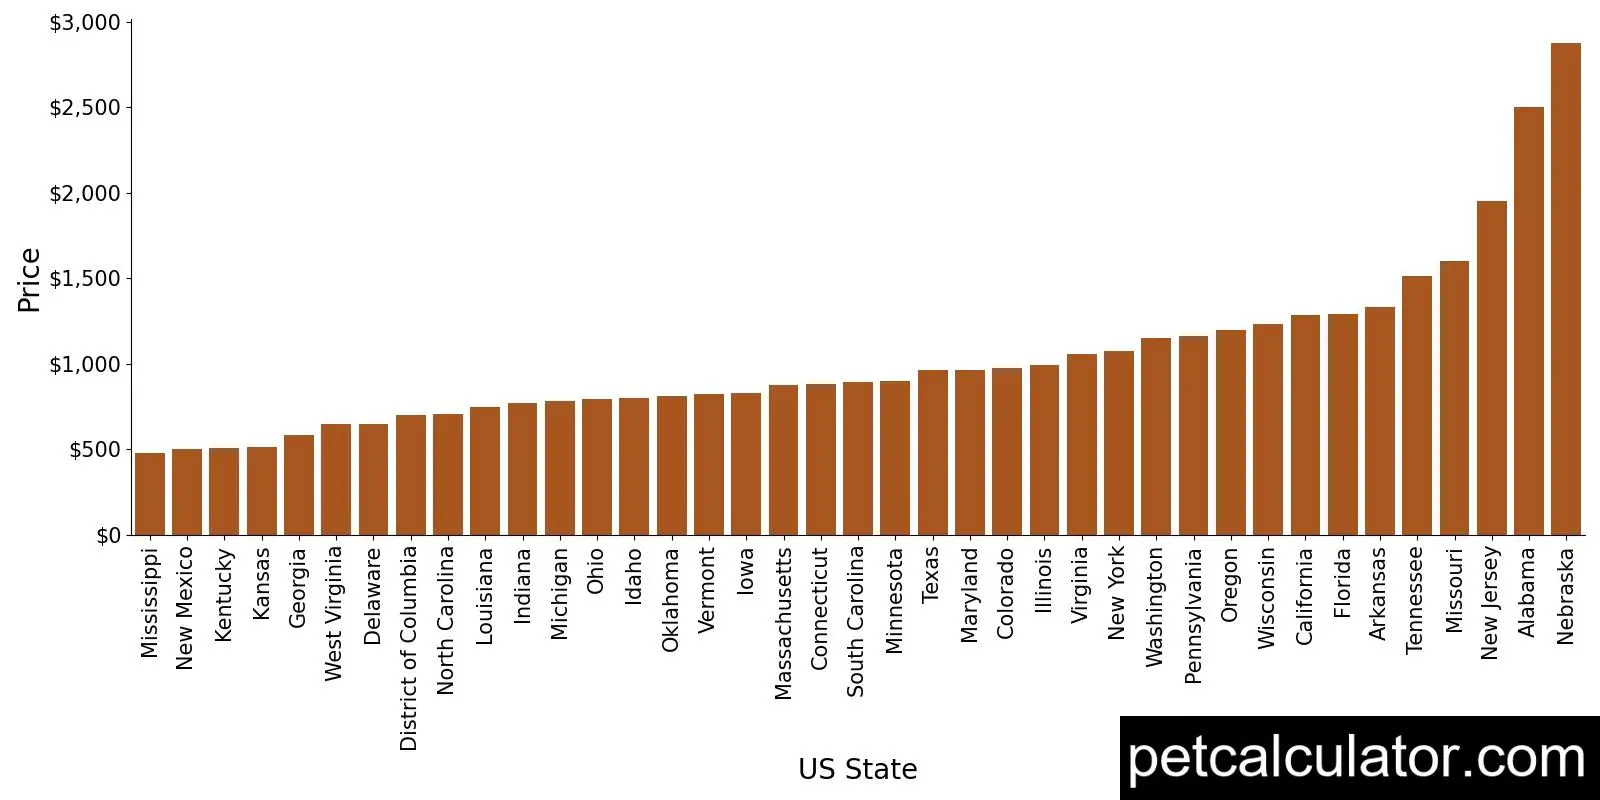 Price of Beagle by US State 